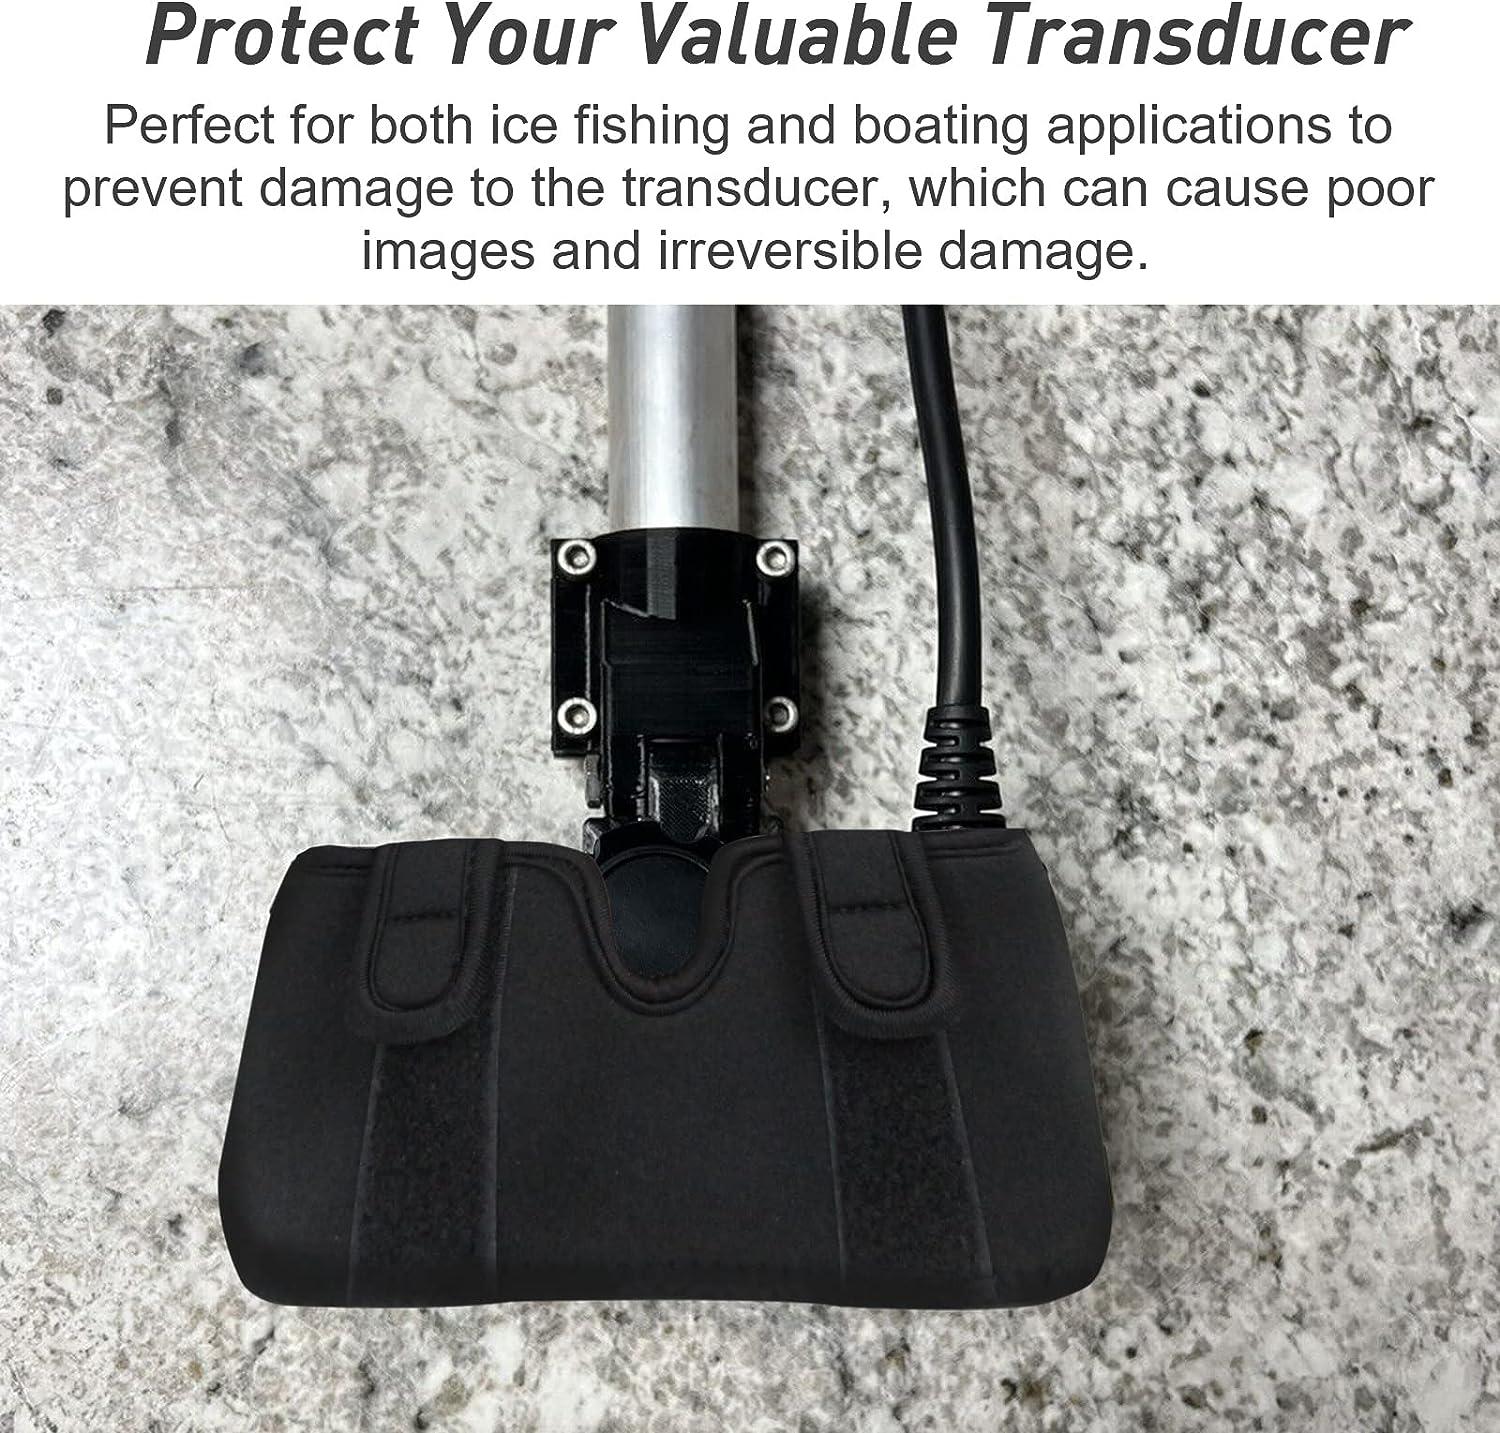 Transducer Cover, Veepeey livescope Cover fit Garmin lvs34 Transducer  Lowrance, Travel Transducer Cover Great for Travel to Protect Your Pricey